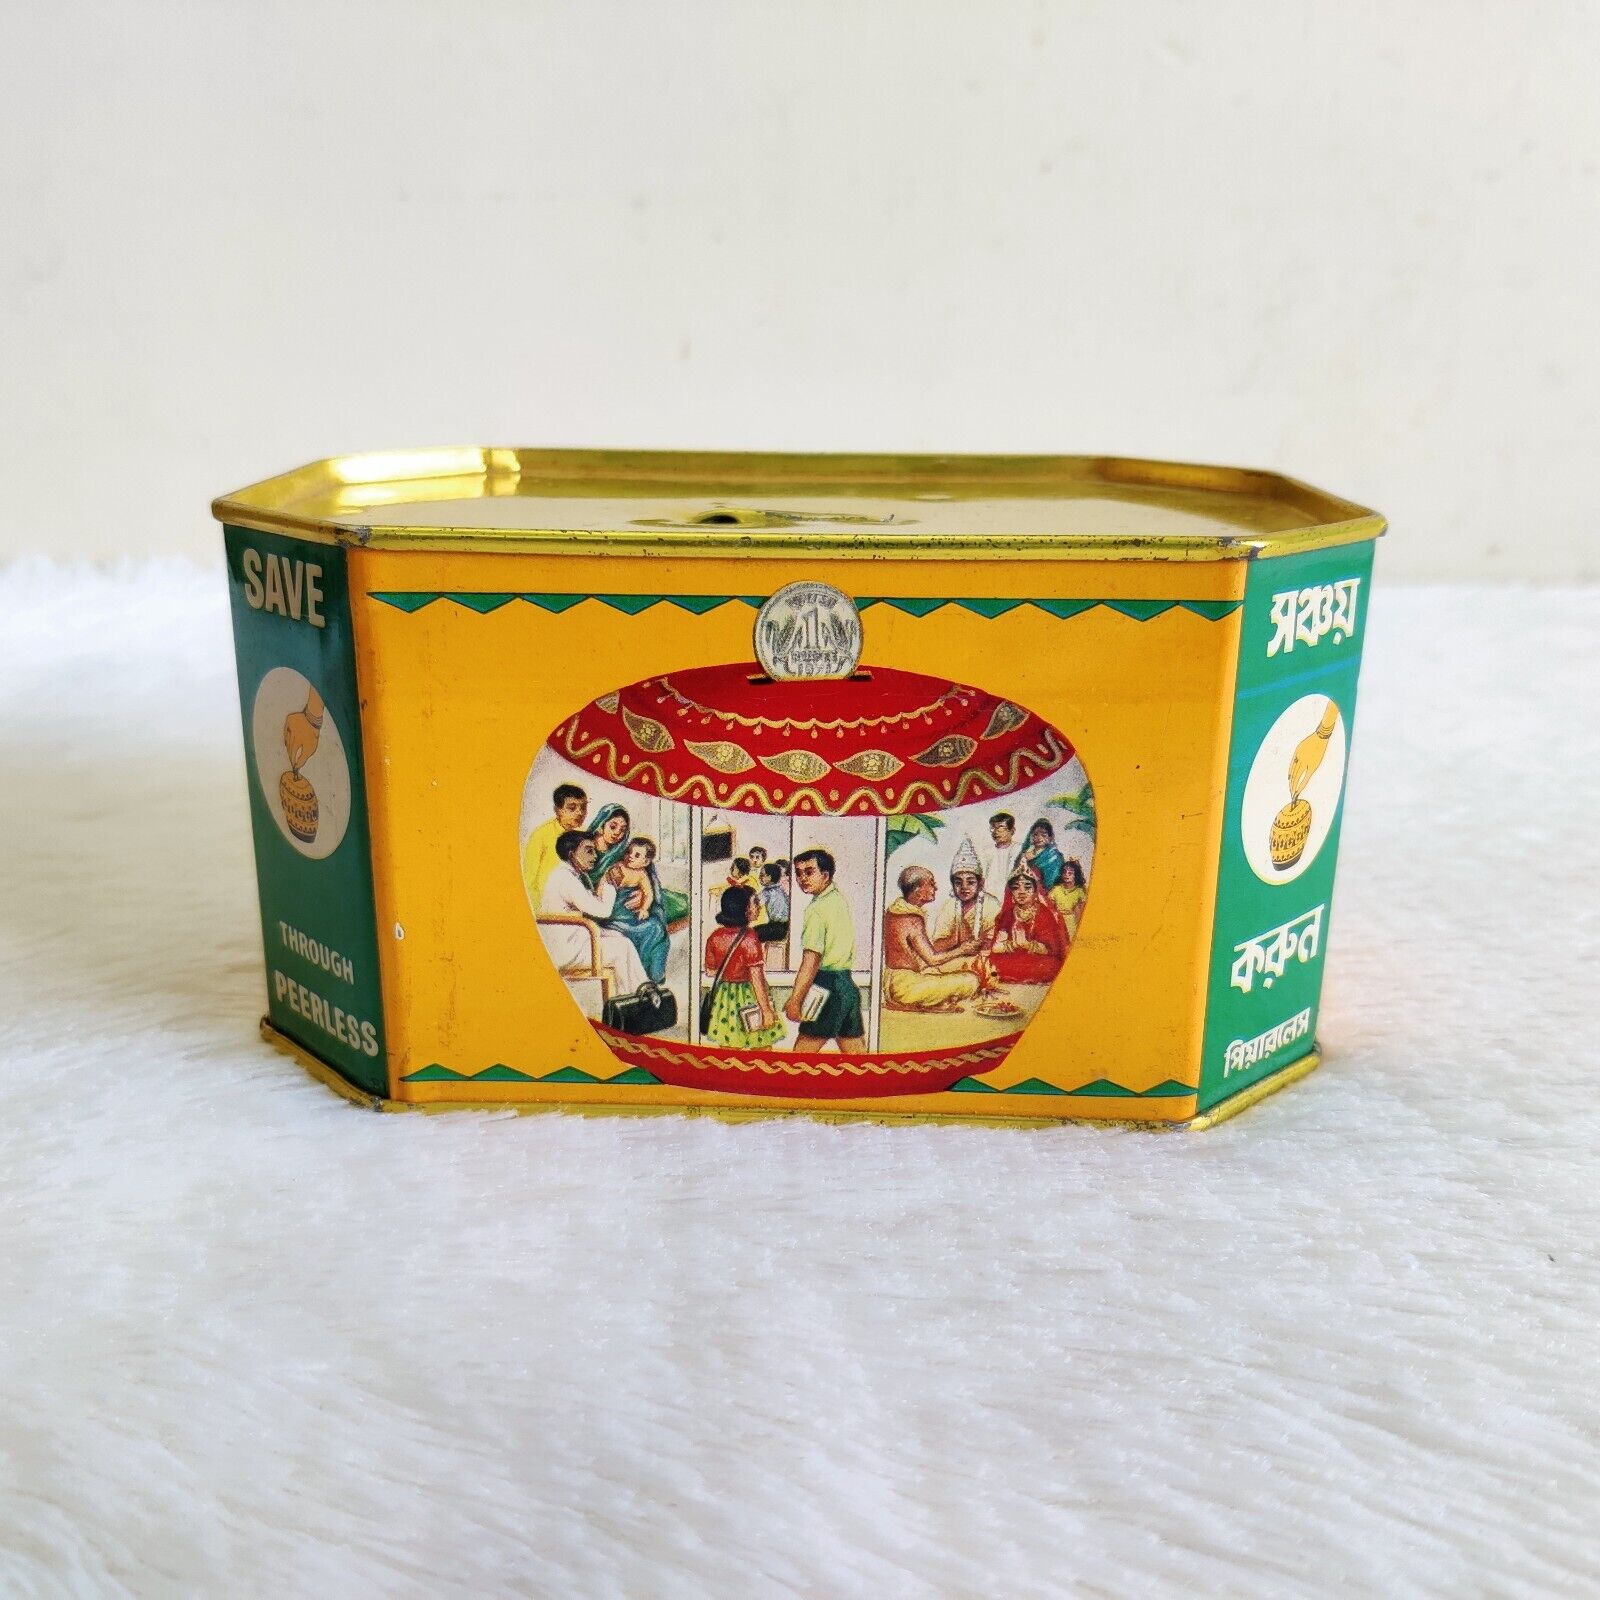 1950s Vintage The Peerless General Finance Advertising Tin Coin Box TB237